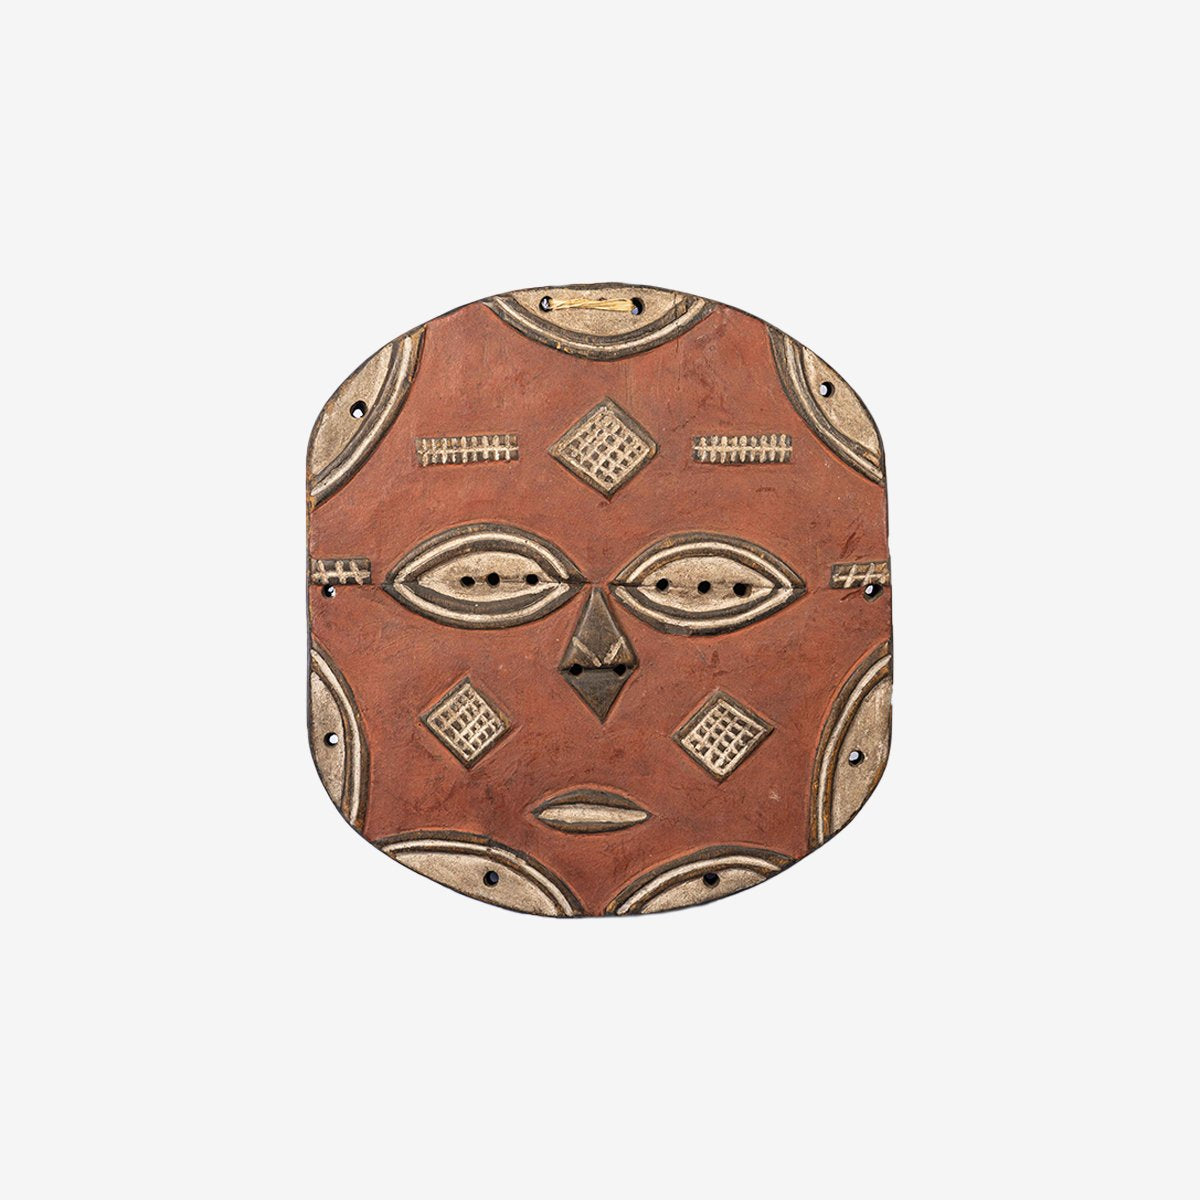 Yaka Mask - Authentic African handicrafts | Clothing, bags, painting, toys & more - CULTURE HUB by Muthoni Unchained